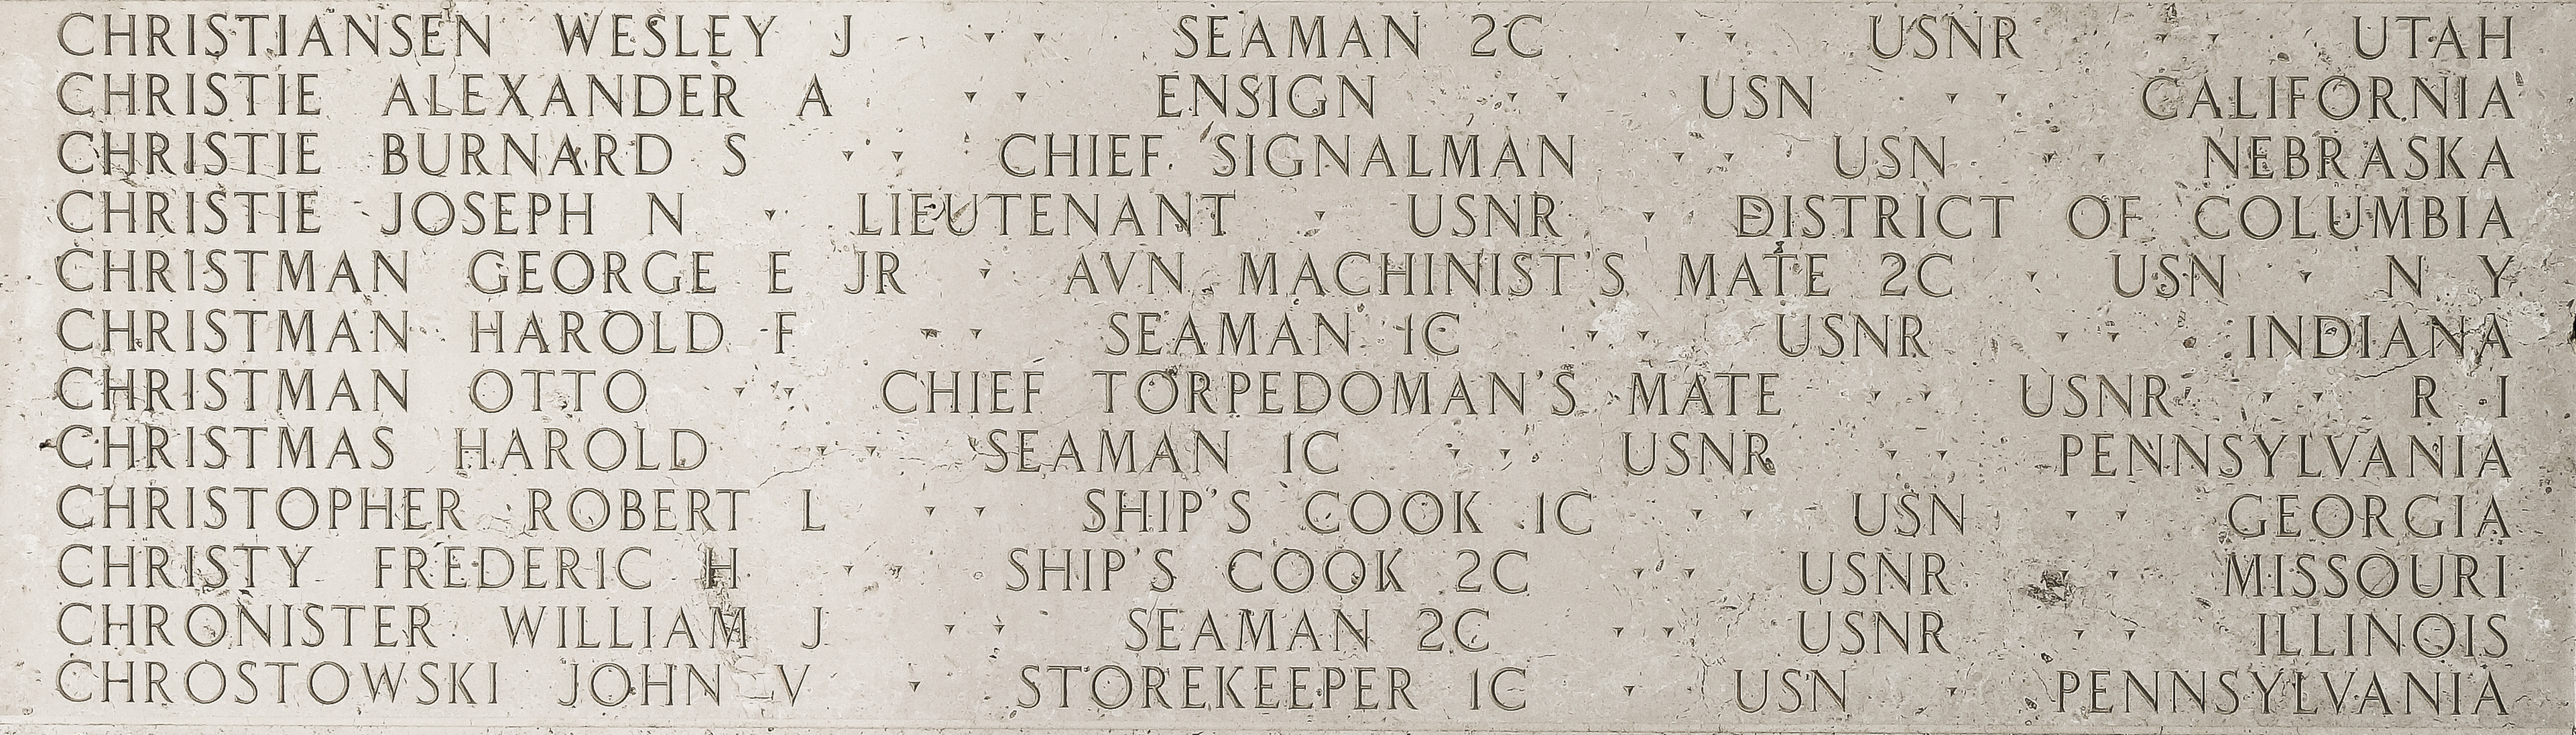 Frederic H. Christy, Ship's Cook Second Class